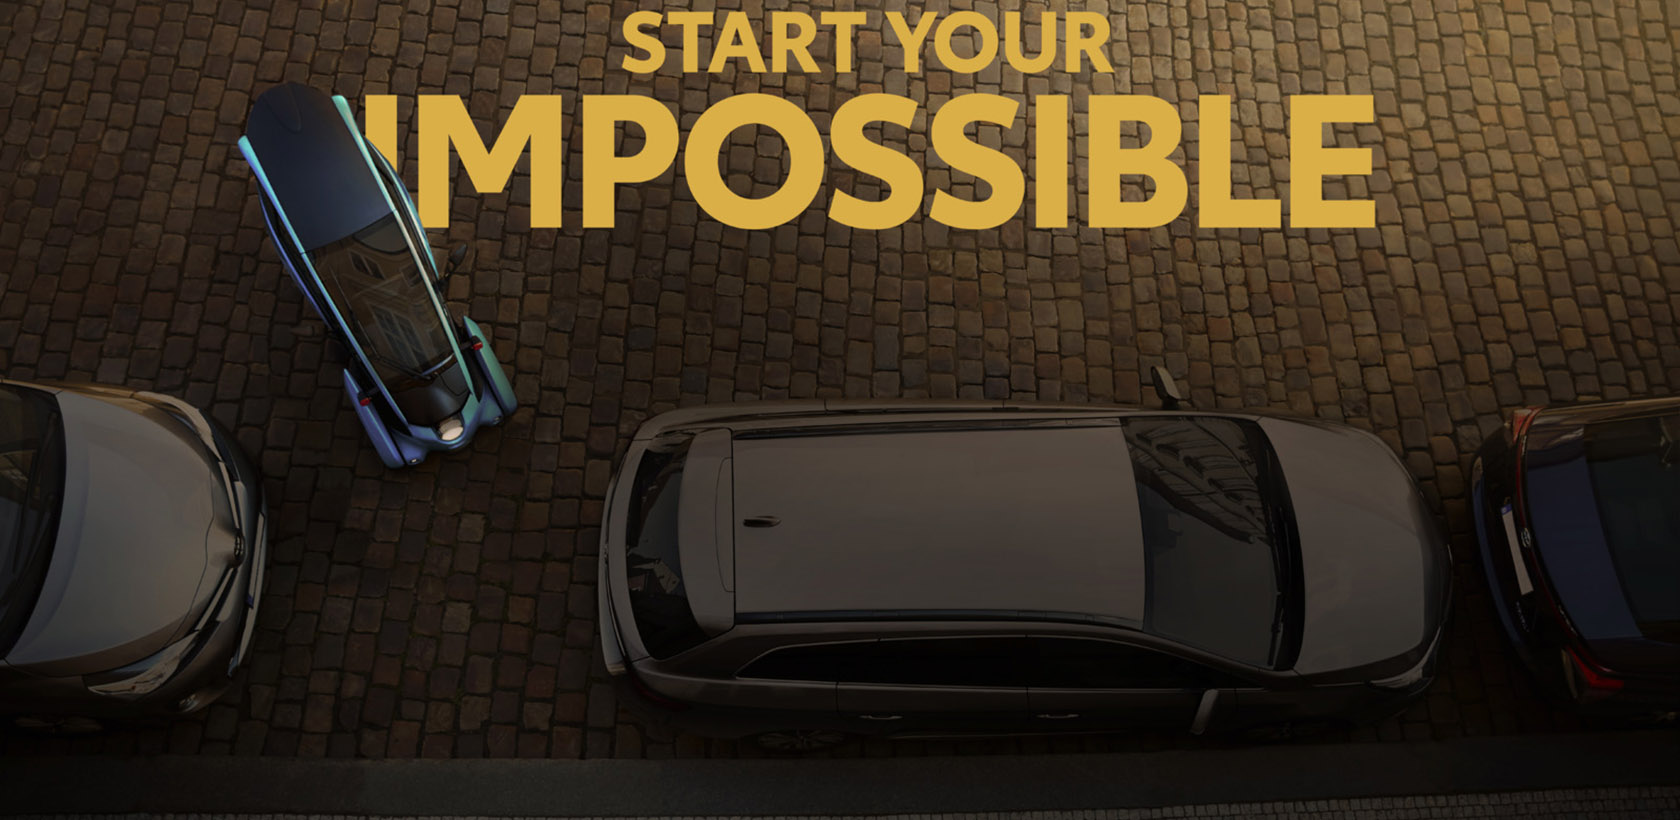 Toyota lance la campagne mondiale Start Your Impossible